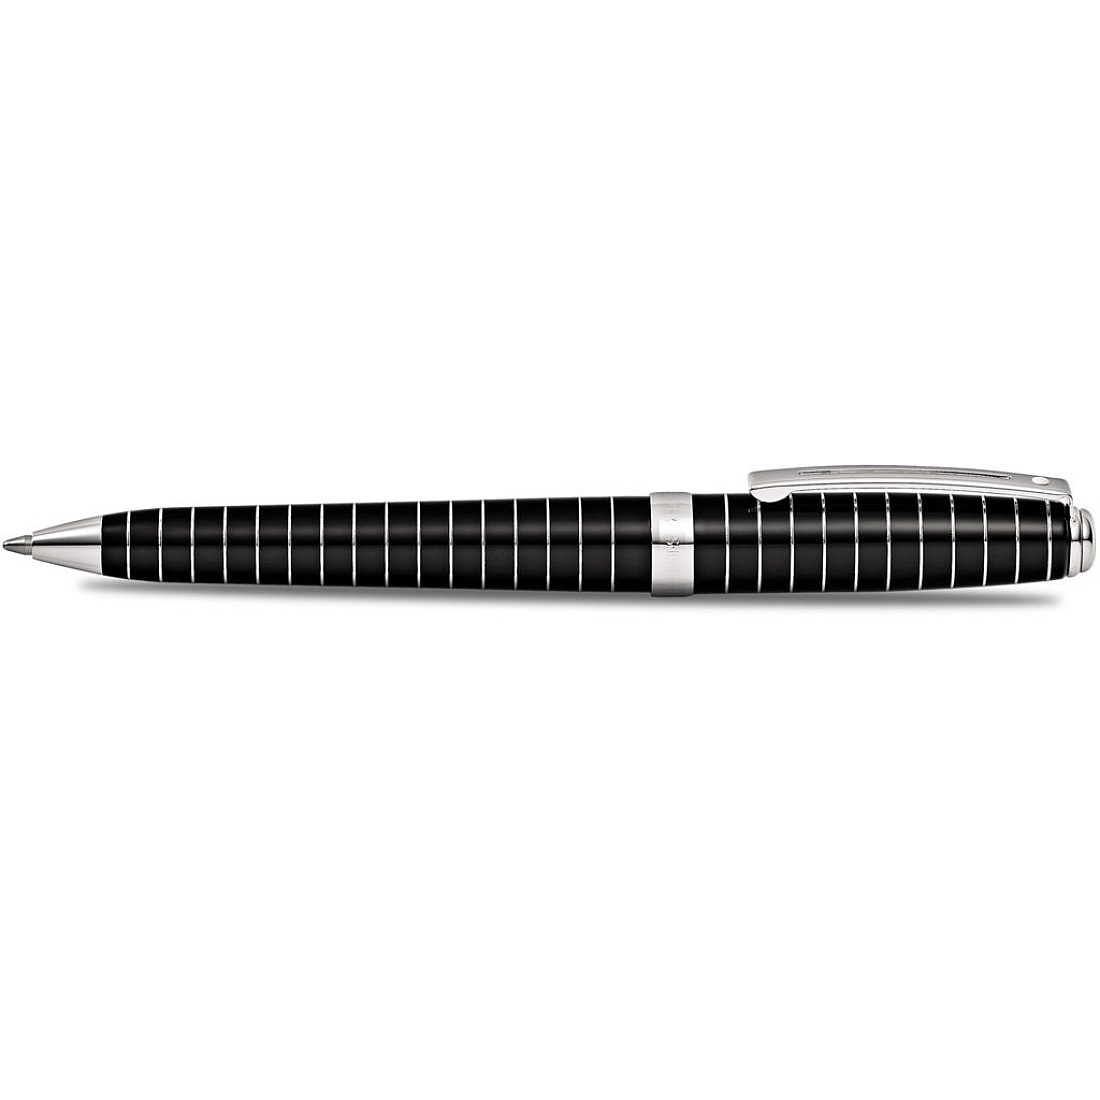 Sheaffer Prelude Black Laque Engraved CT Ballpoint